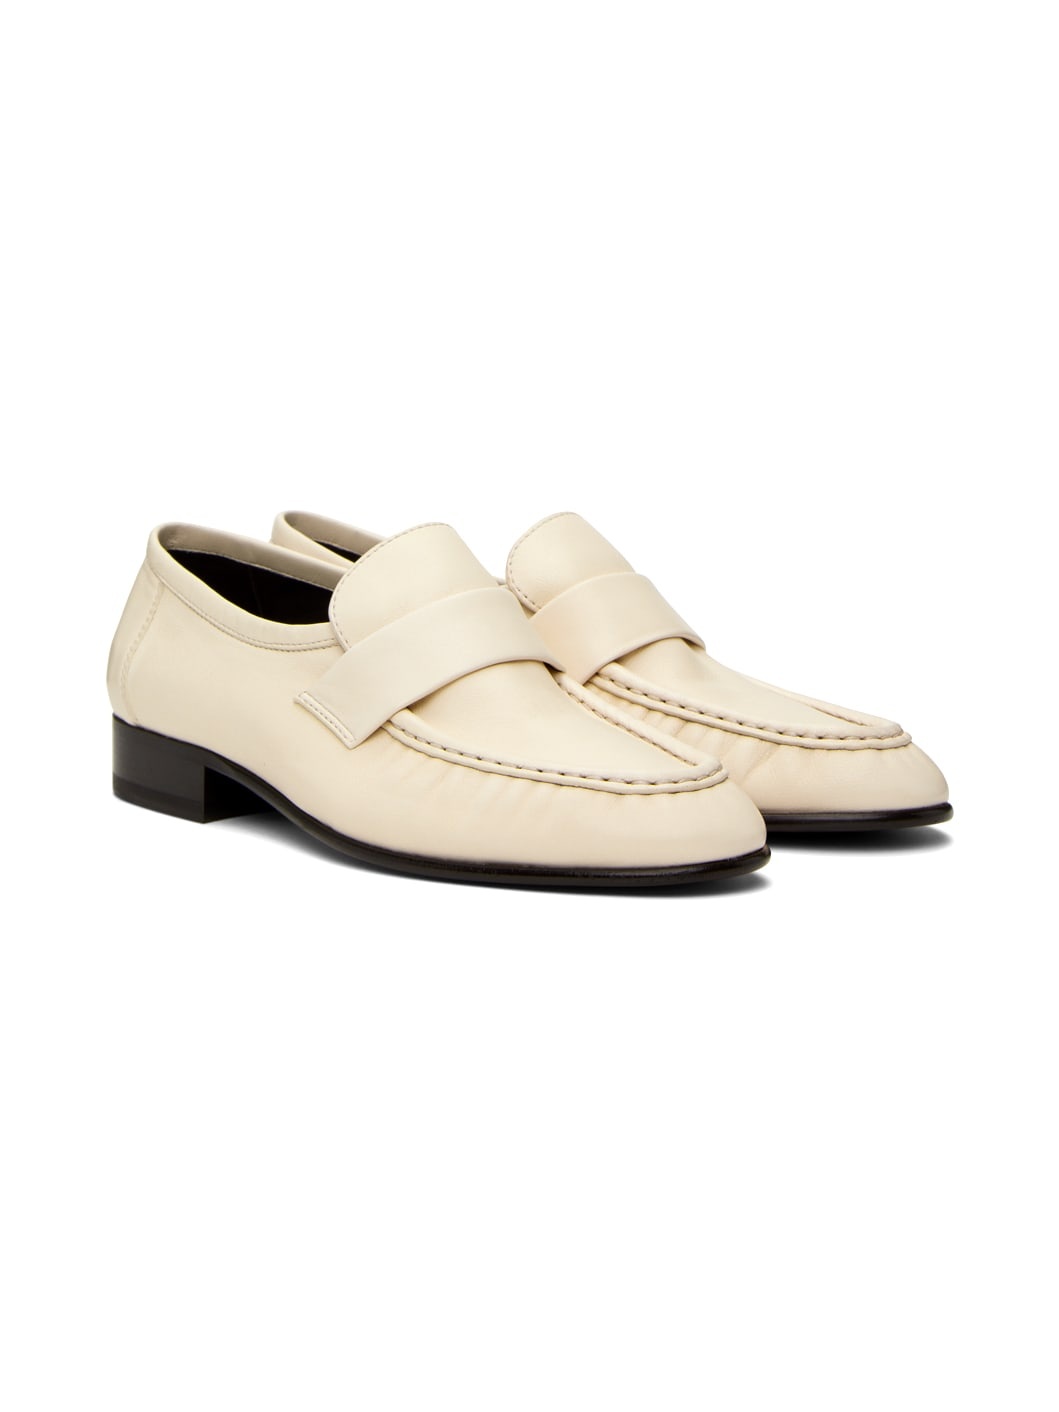 Off-White Soft Loafers - 4